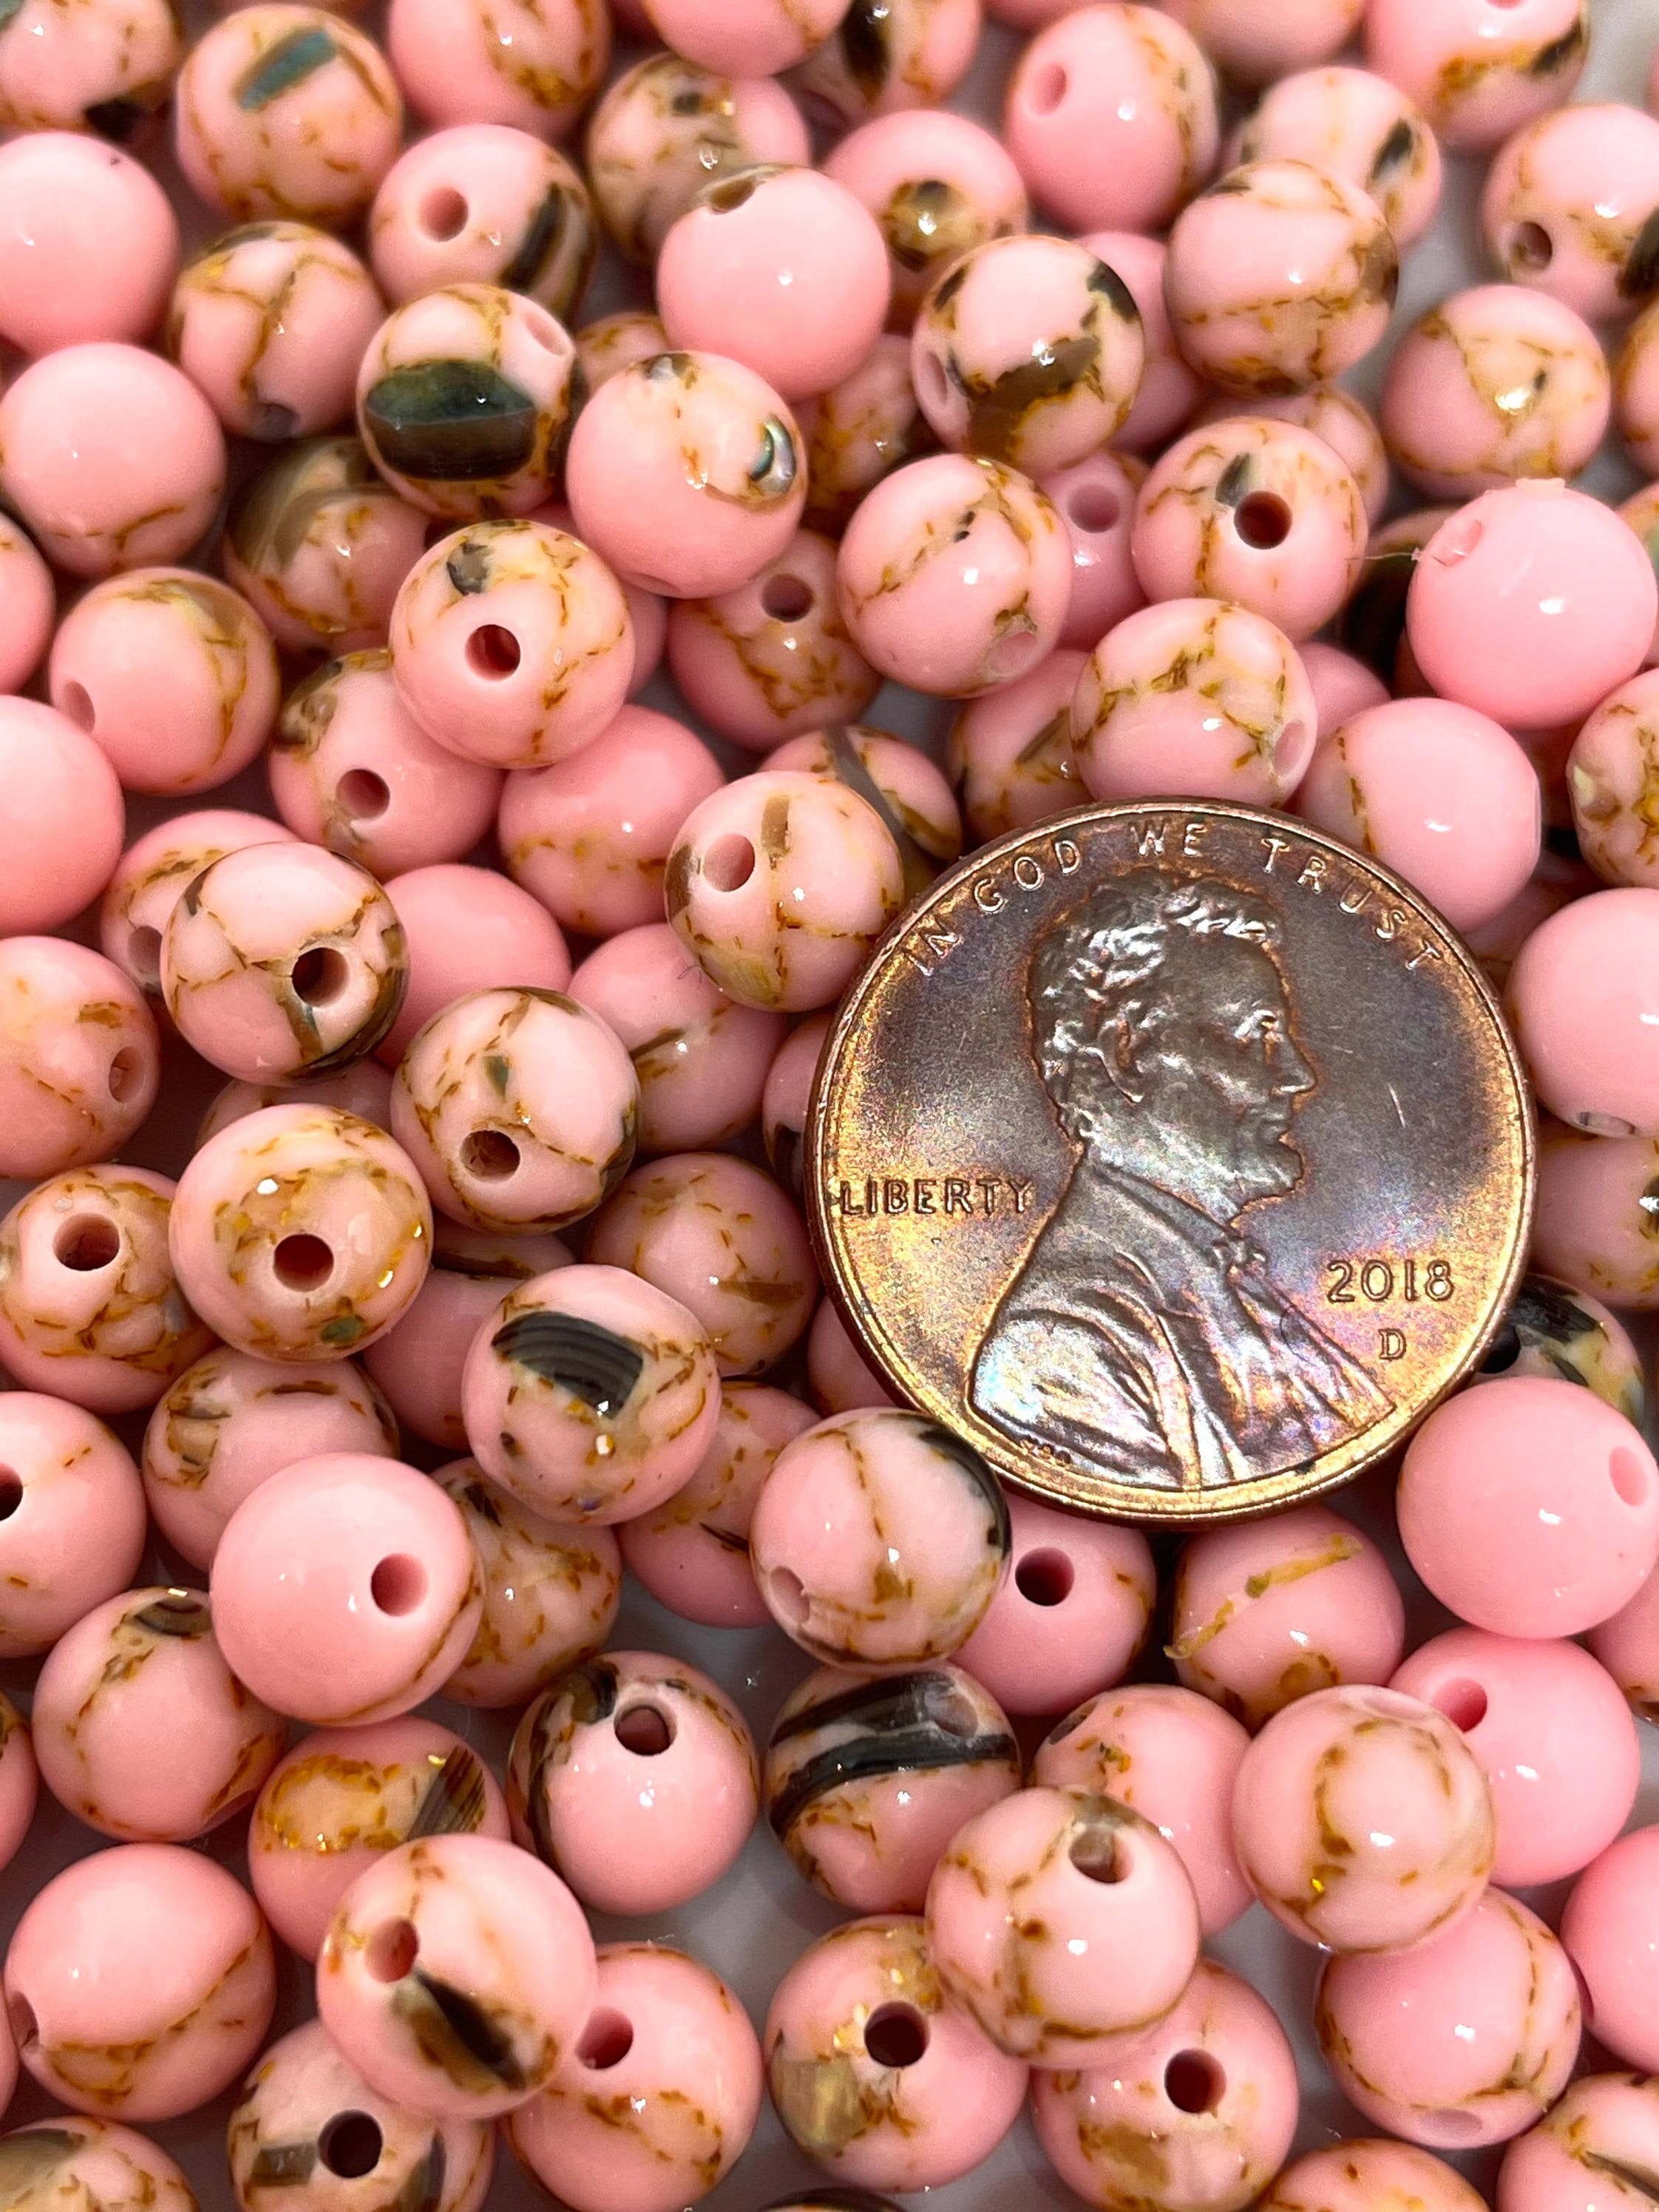 6mm Pretty Pink Howlite Stone Beads, Howlite Turquoise Beads for